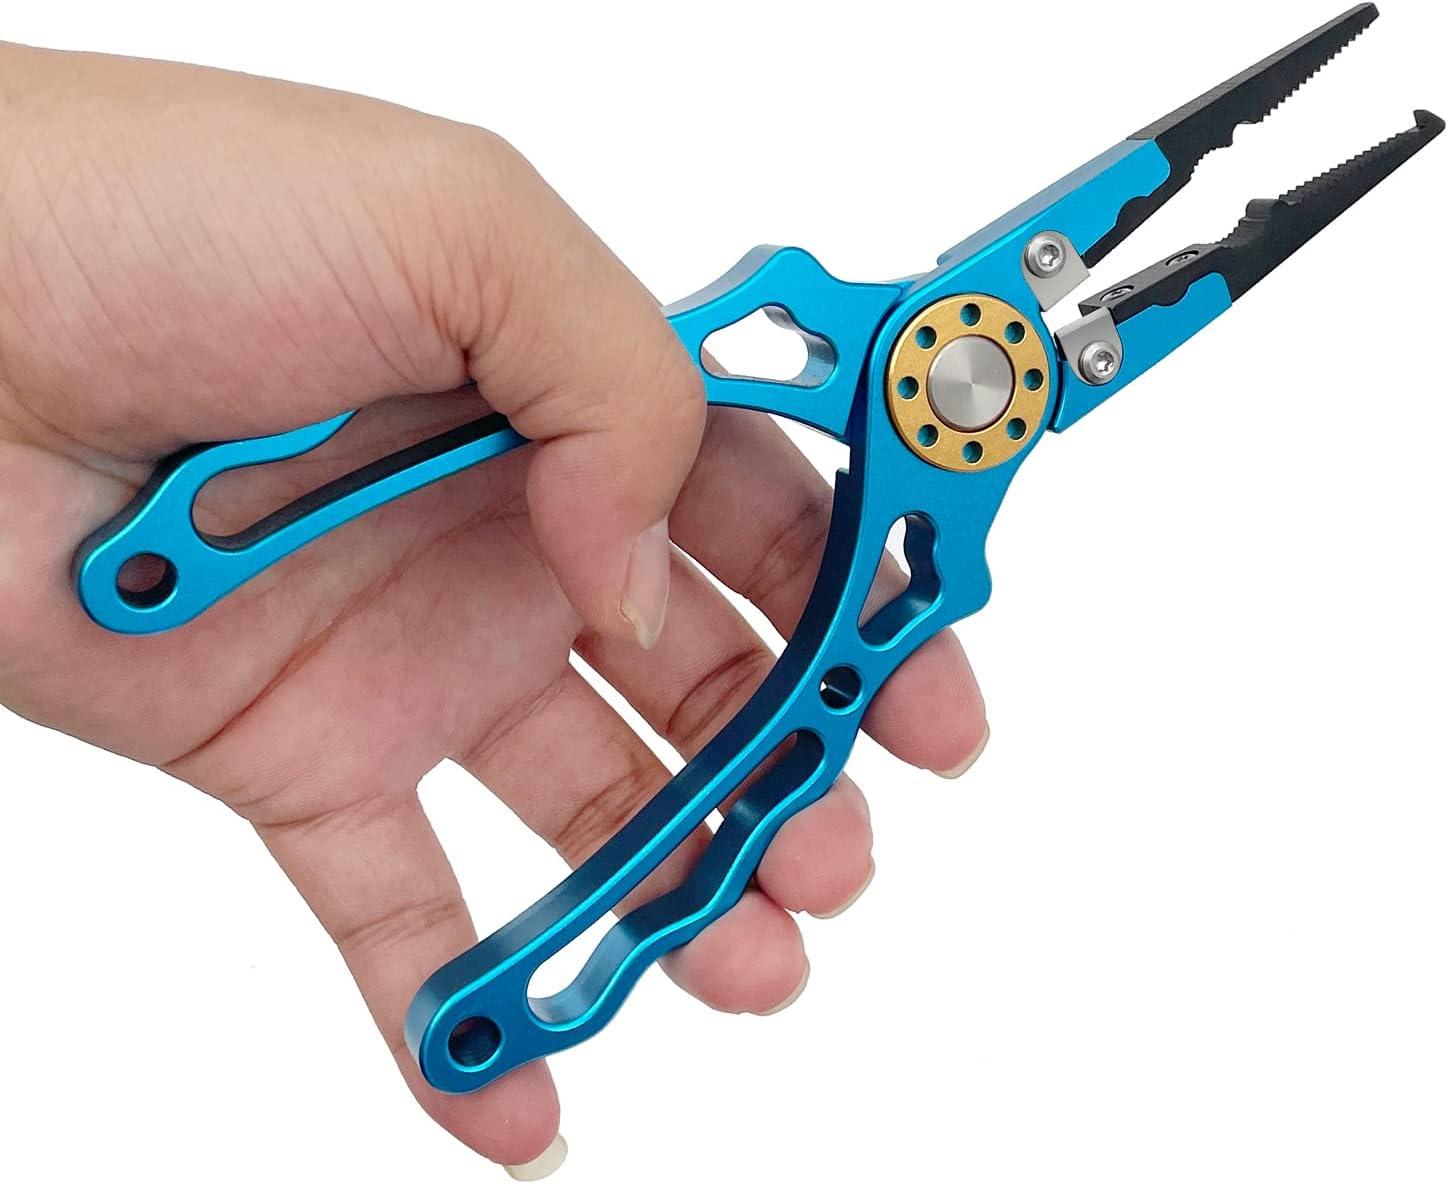 Ismosm Fishing Pliers Plus Fish Gripper Multi-Functional Fishing Gear  Fishing Line Cutter Fish Hook Remover for Both Salt Water and Fresh Water  Blue